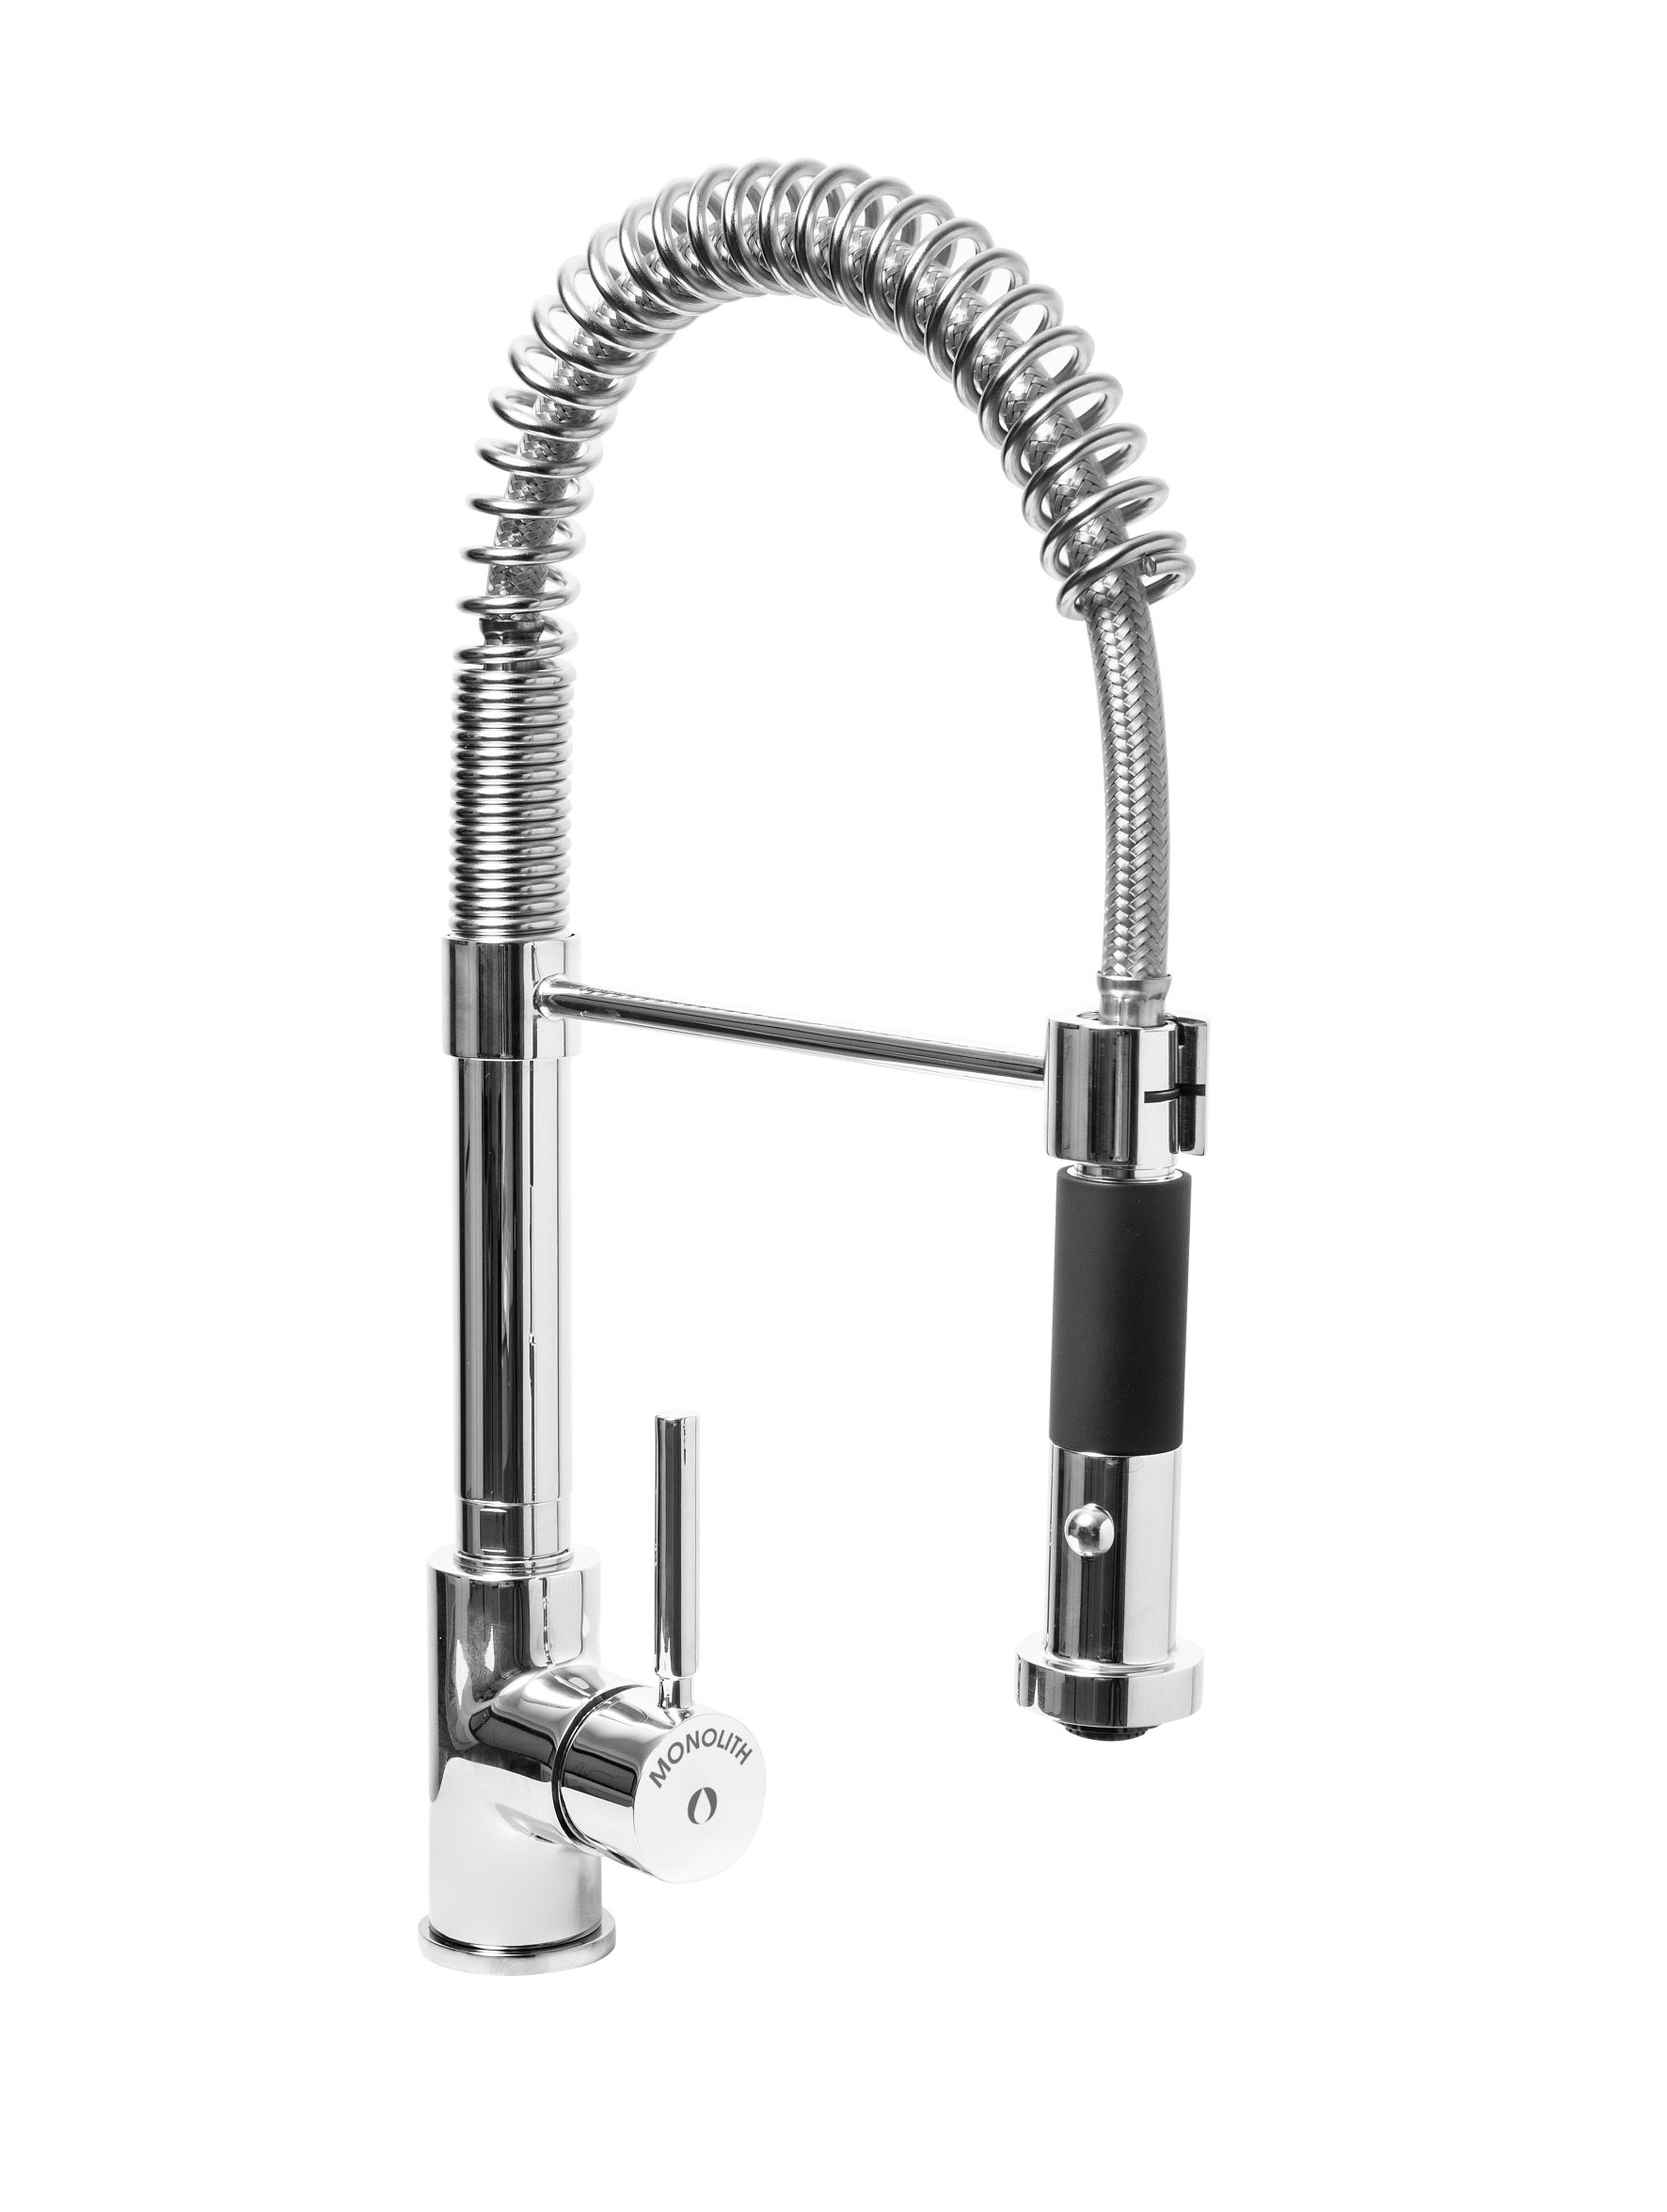 Stainless Steel Faucet Is Stretchable